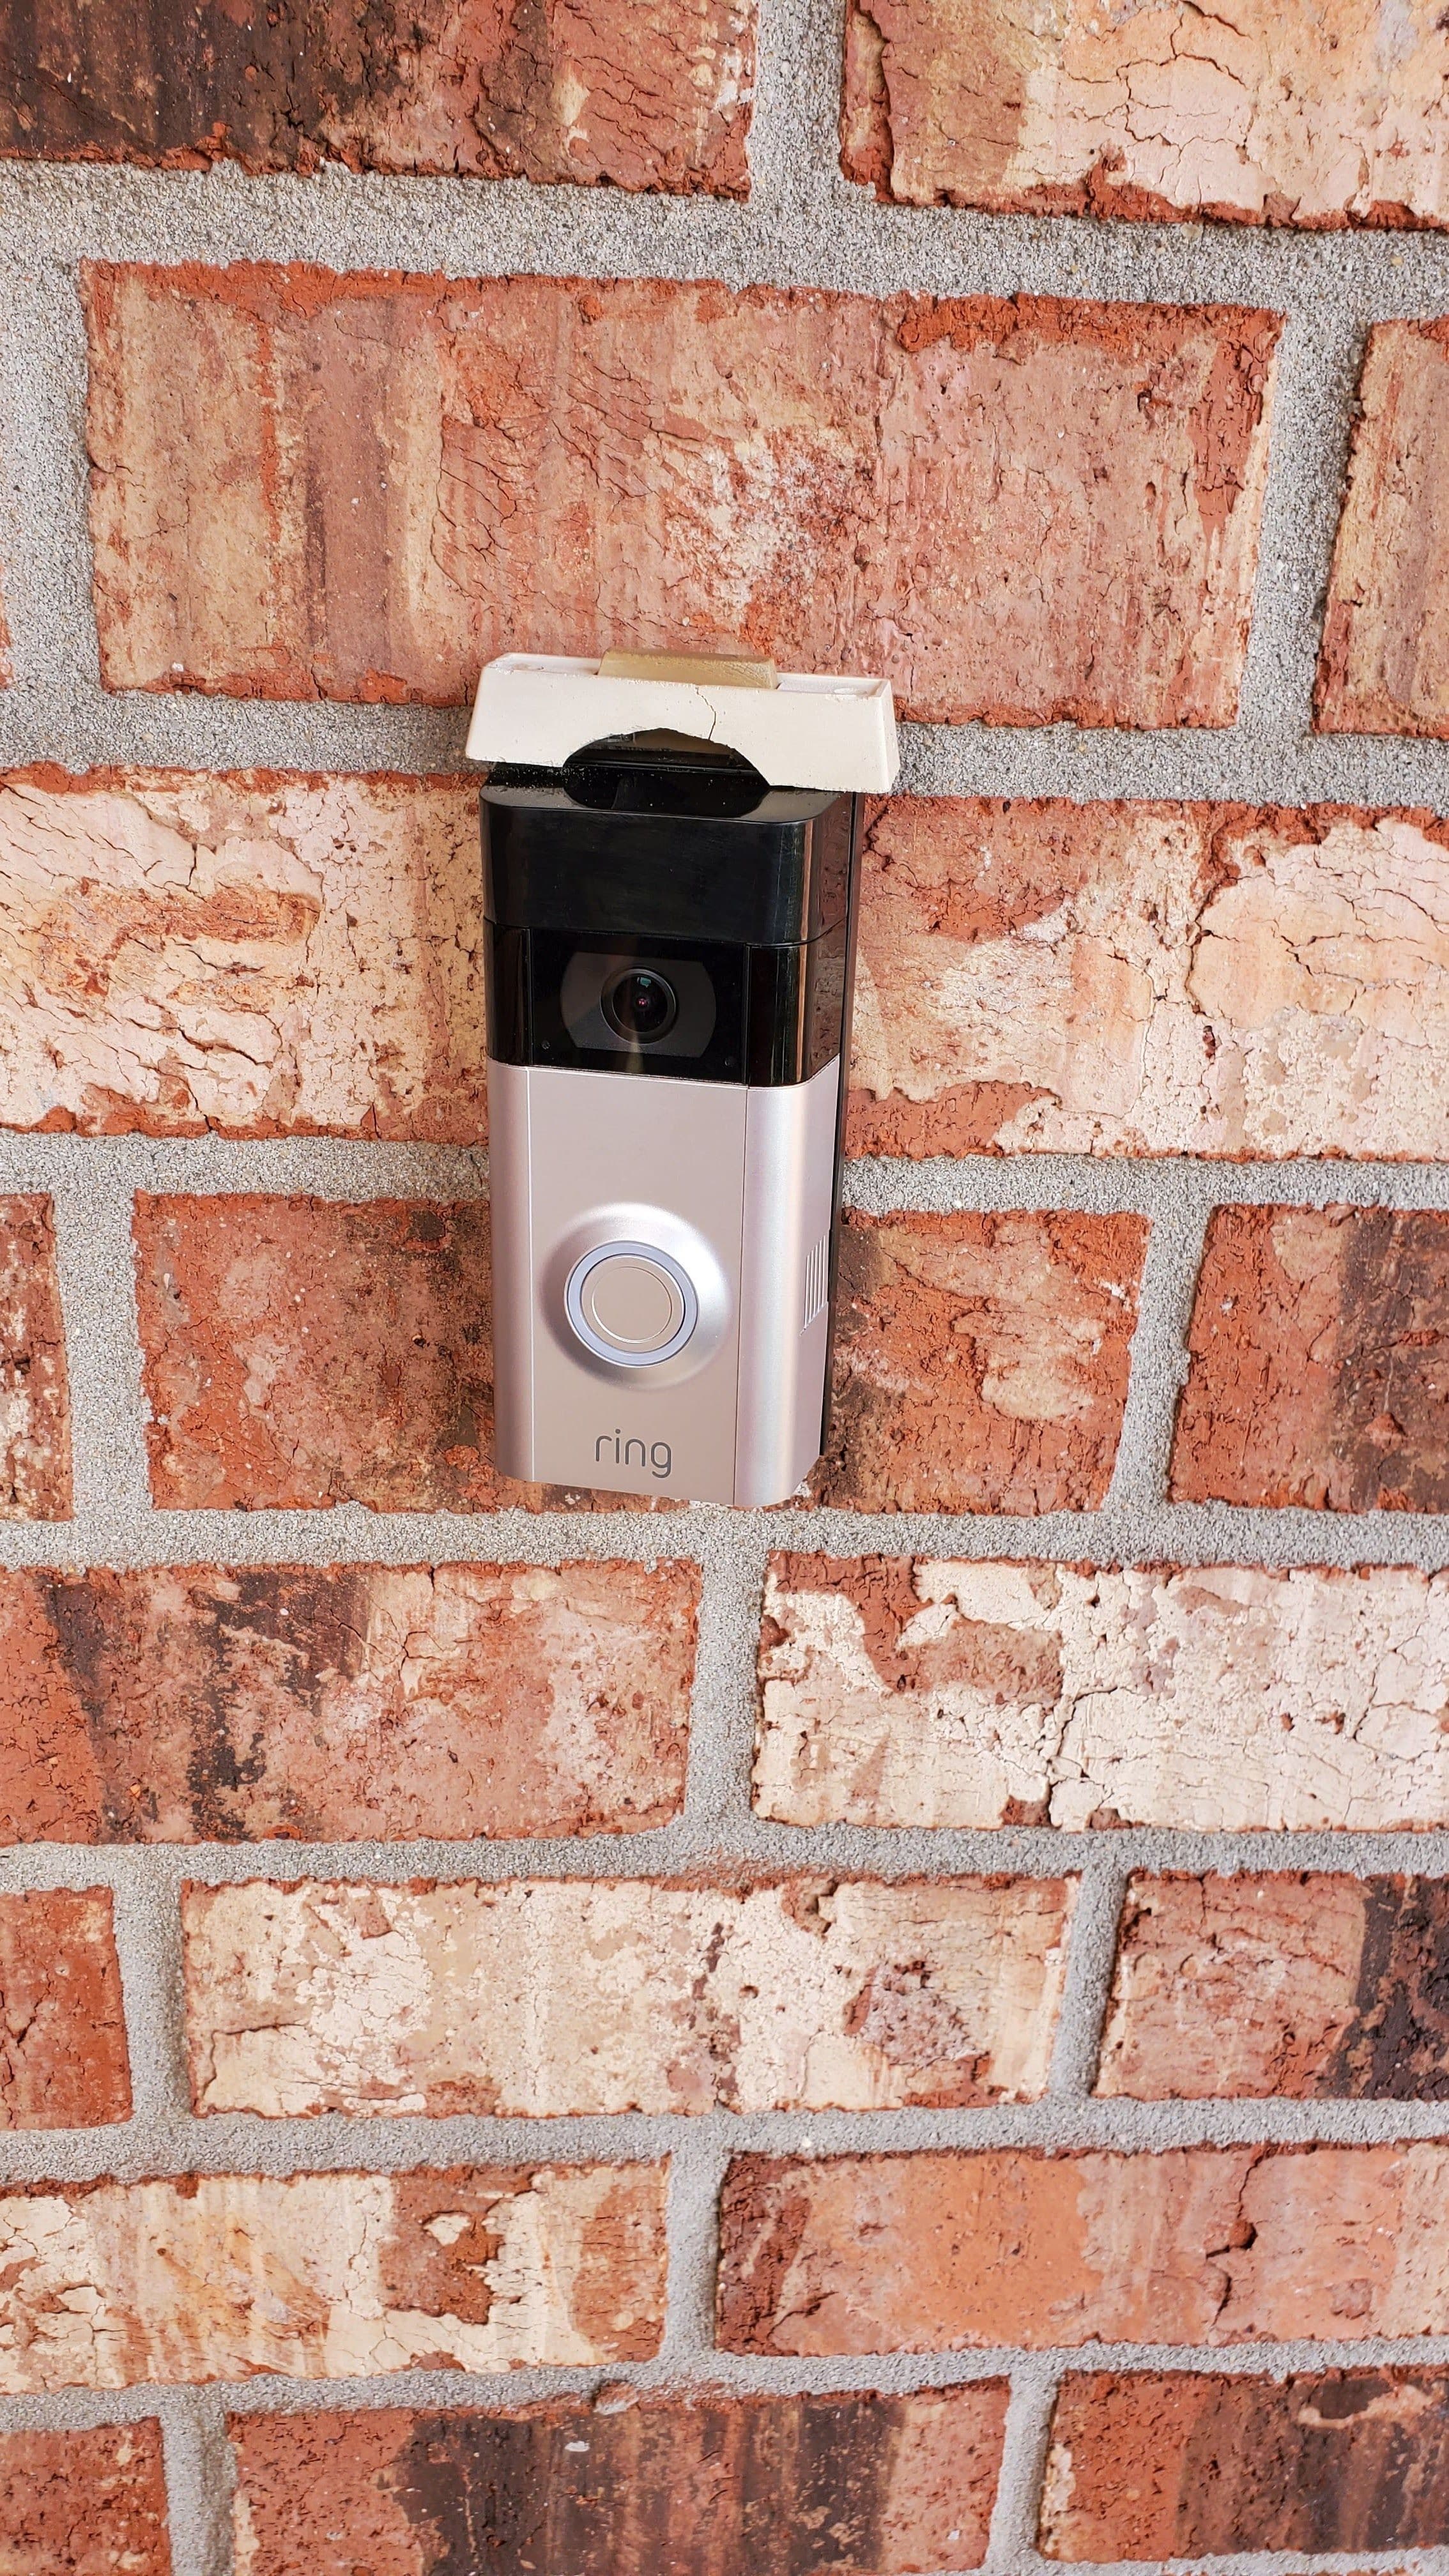 Out With The Old In With The New Are Ready To Upgrade Your Doorbell Experience To The Conveinience Of A VideoDoorbell